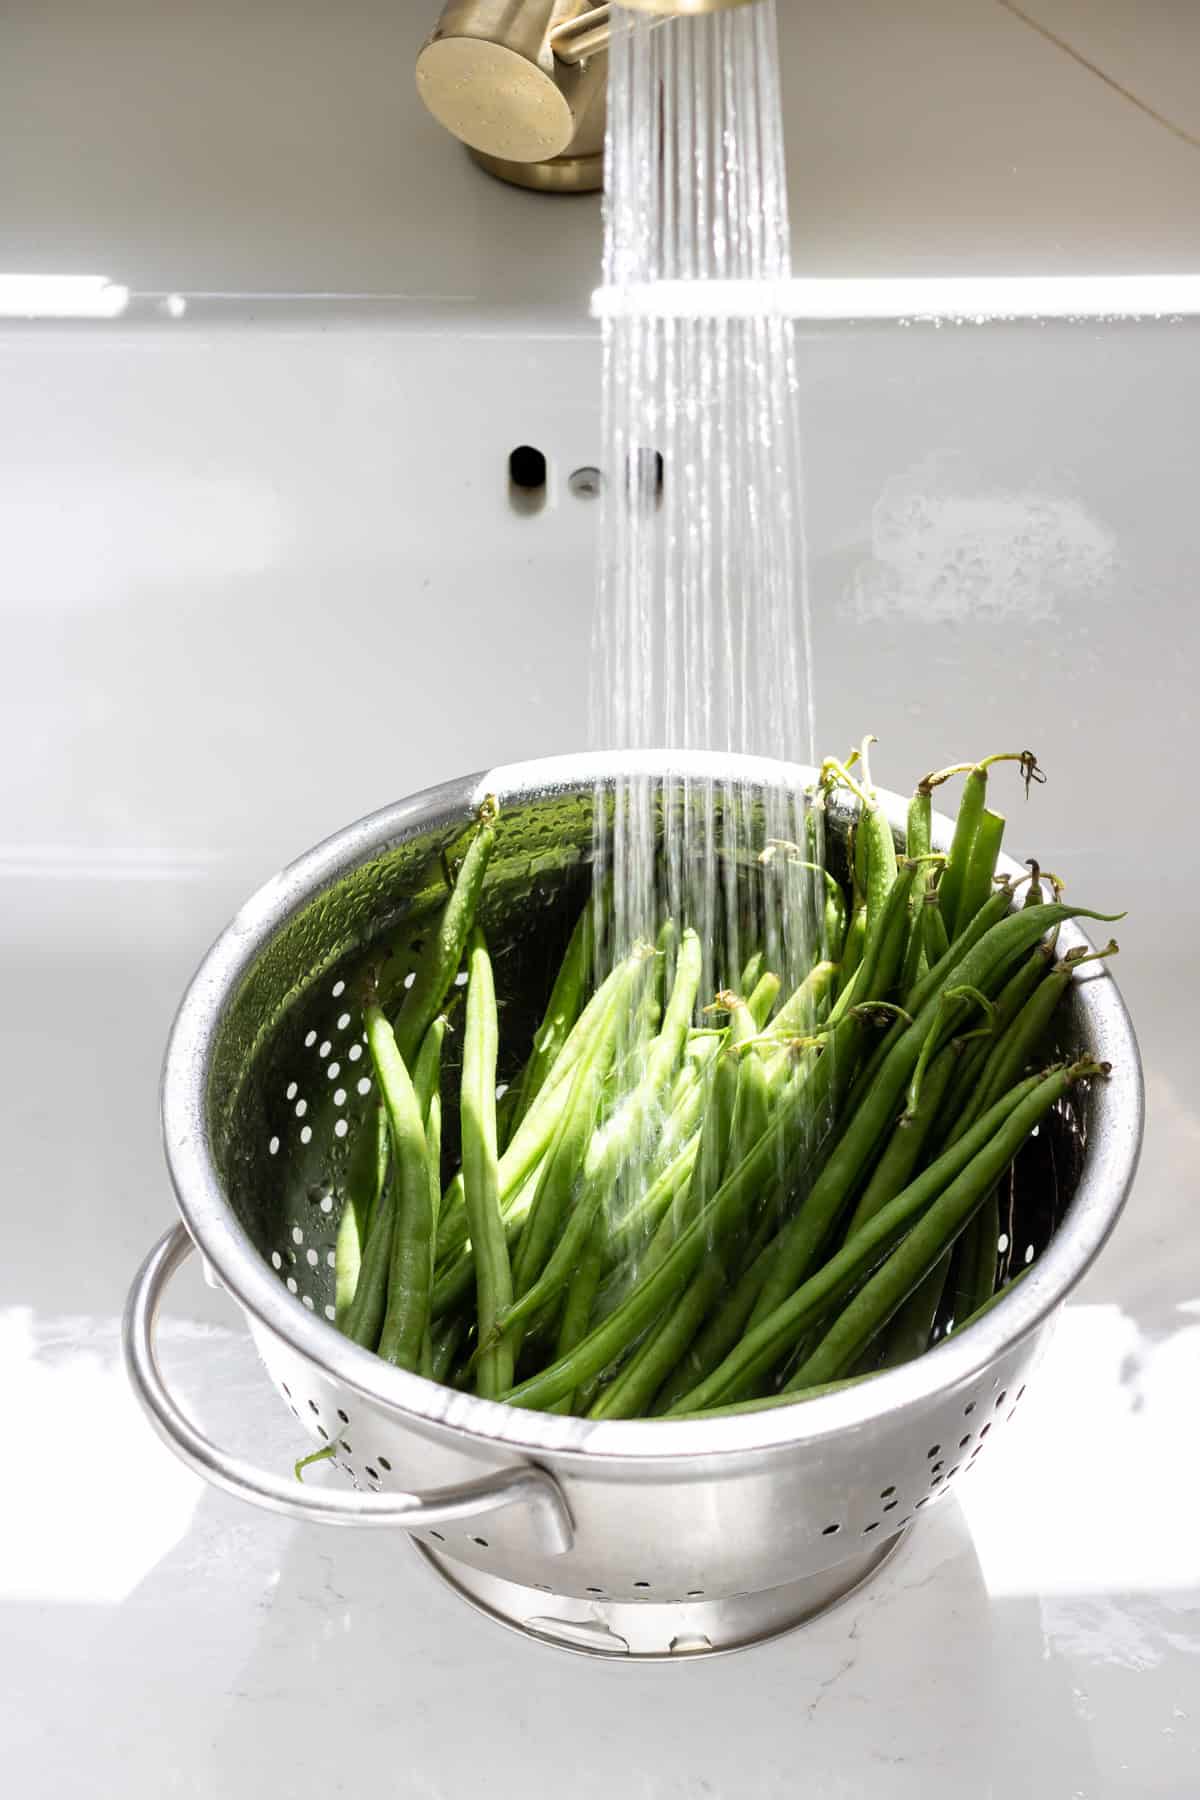 Rinsing green beans in a colander in a sink.